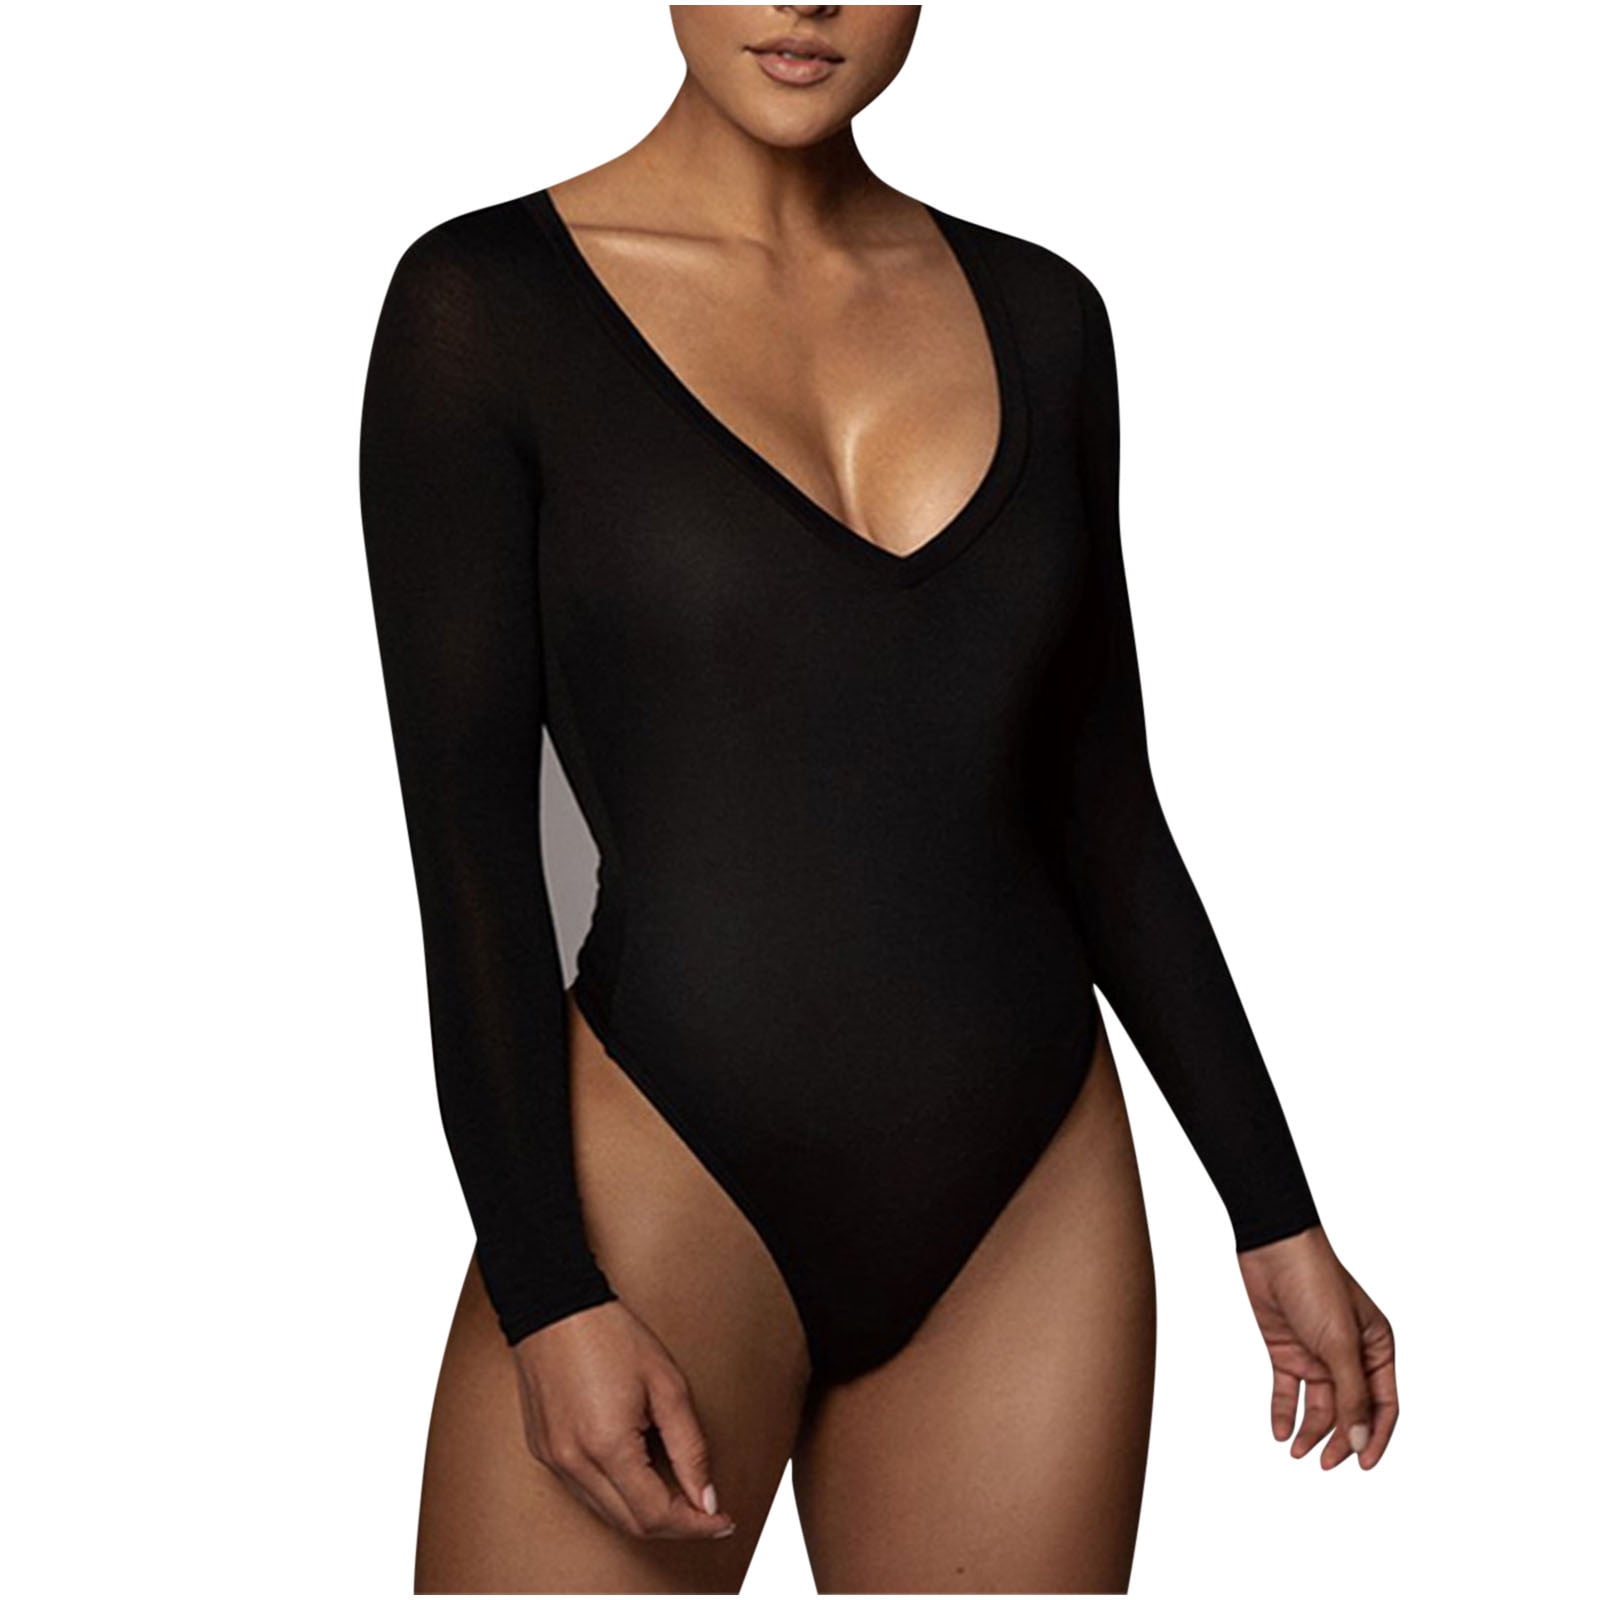 Start With The Basics Plunge Neck Thong Bodysuit in Black